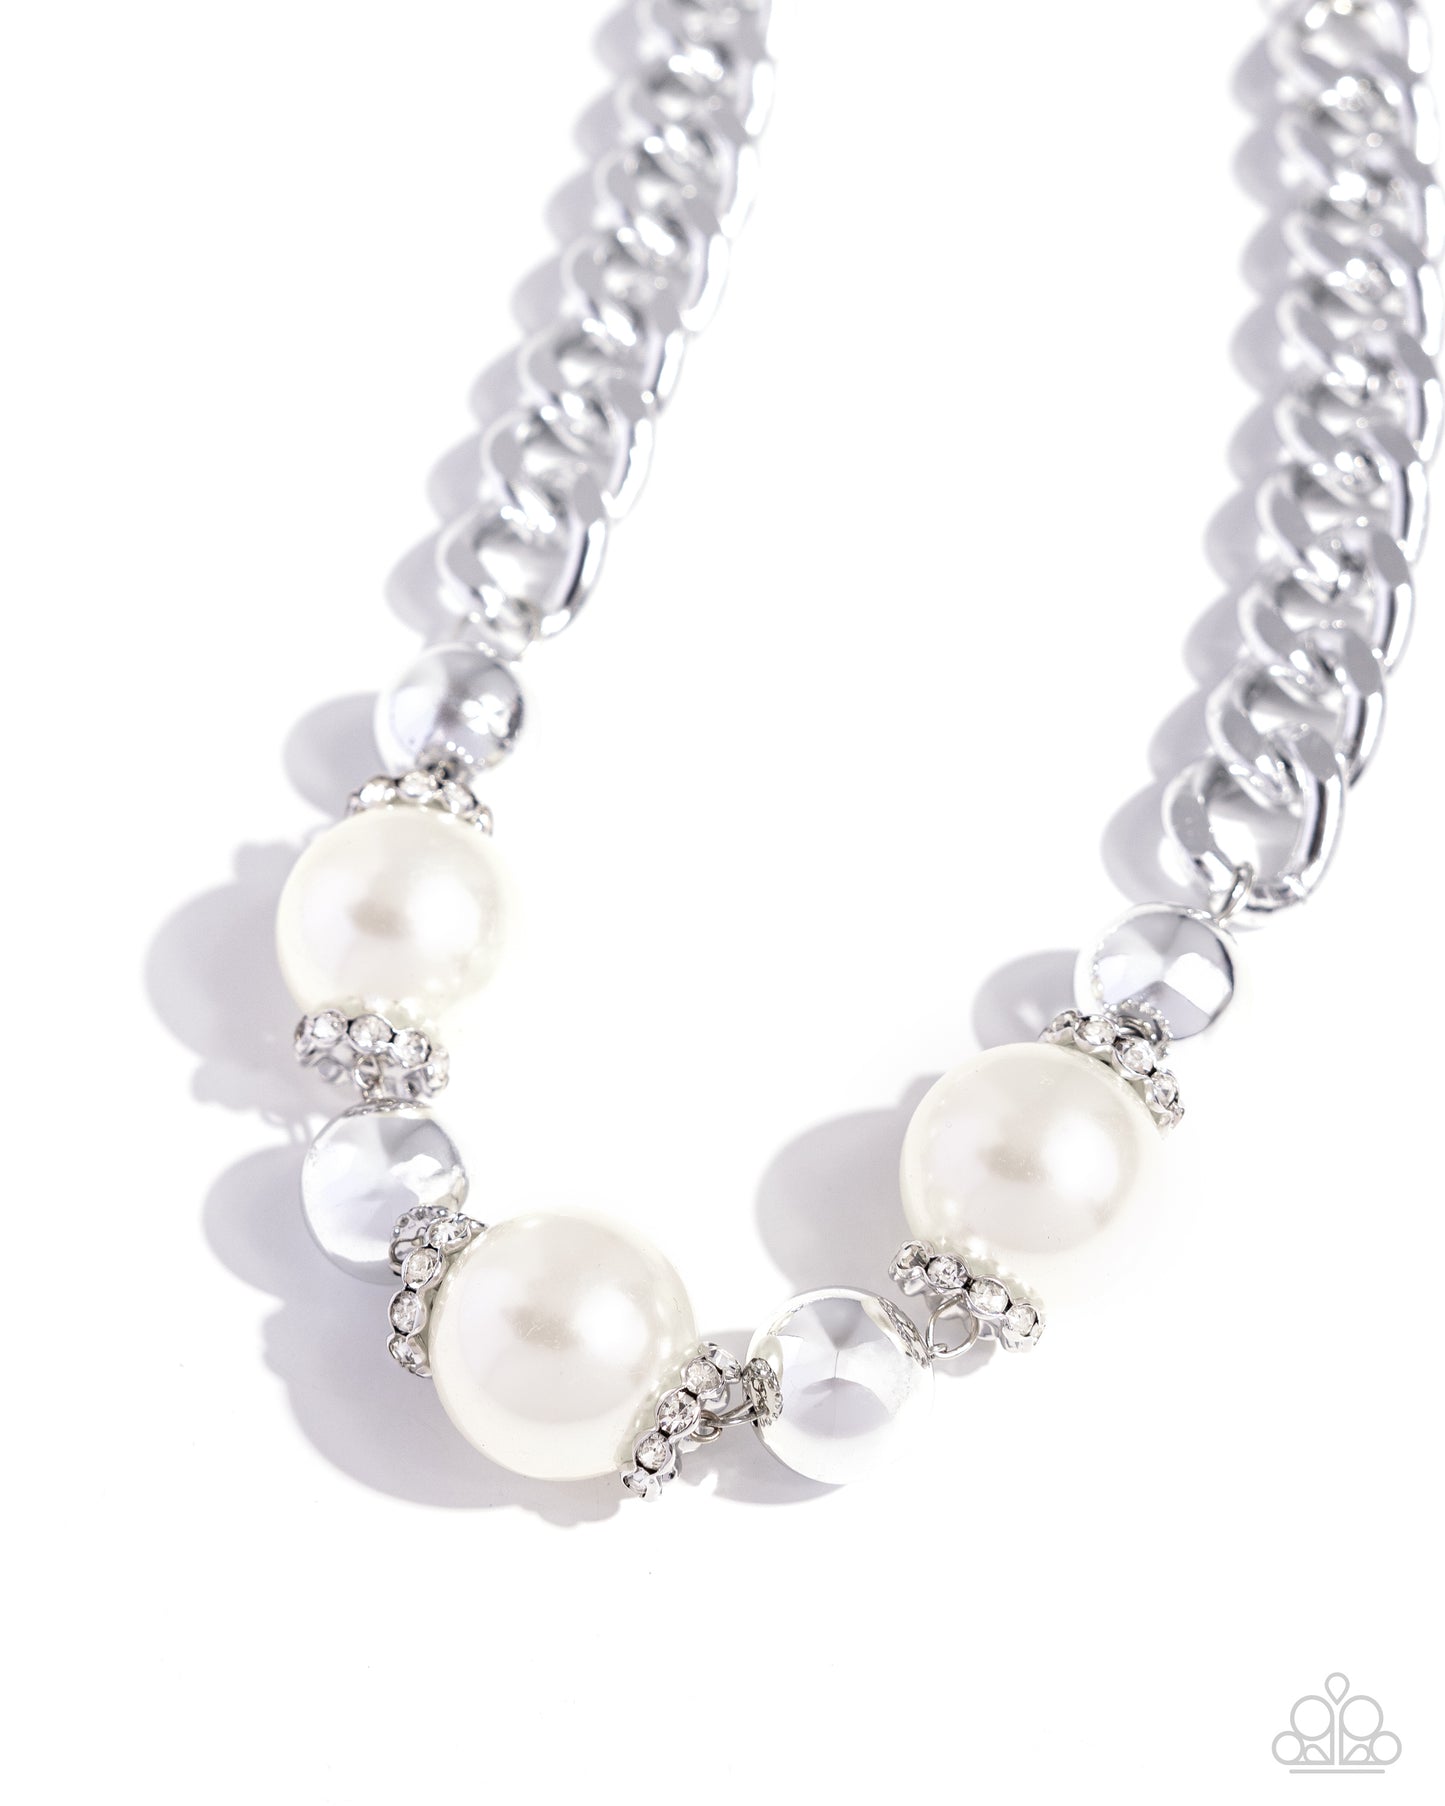 Generously Glossy - White Oversized Pearls/Oversized Curb Chain Paparazzi Necklace & matching earrings